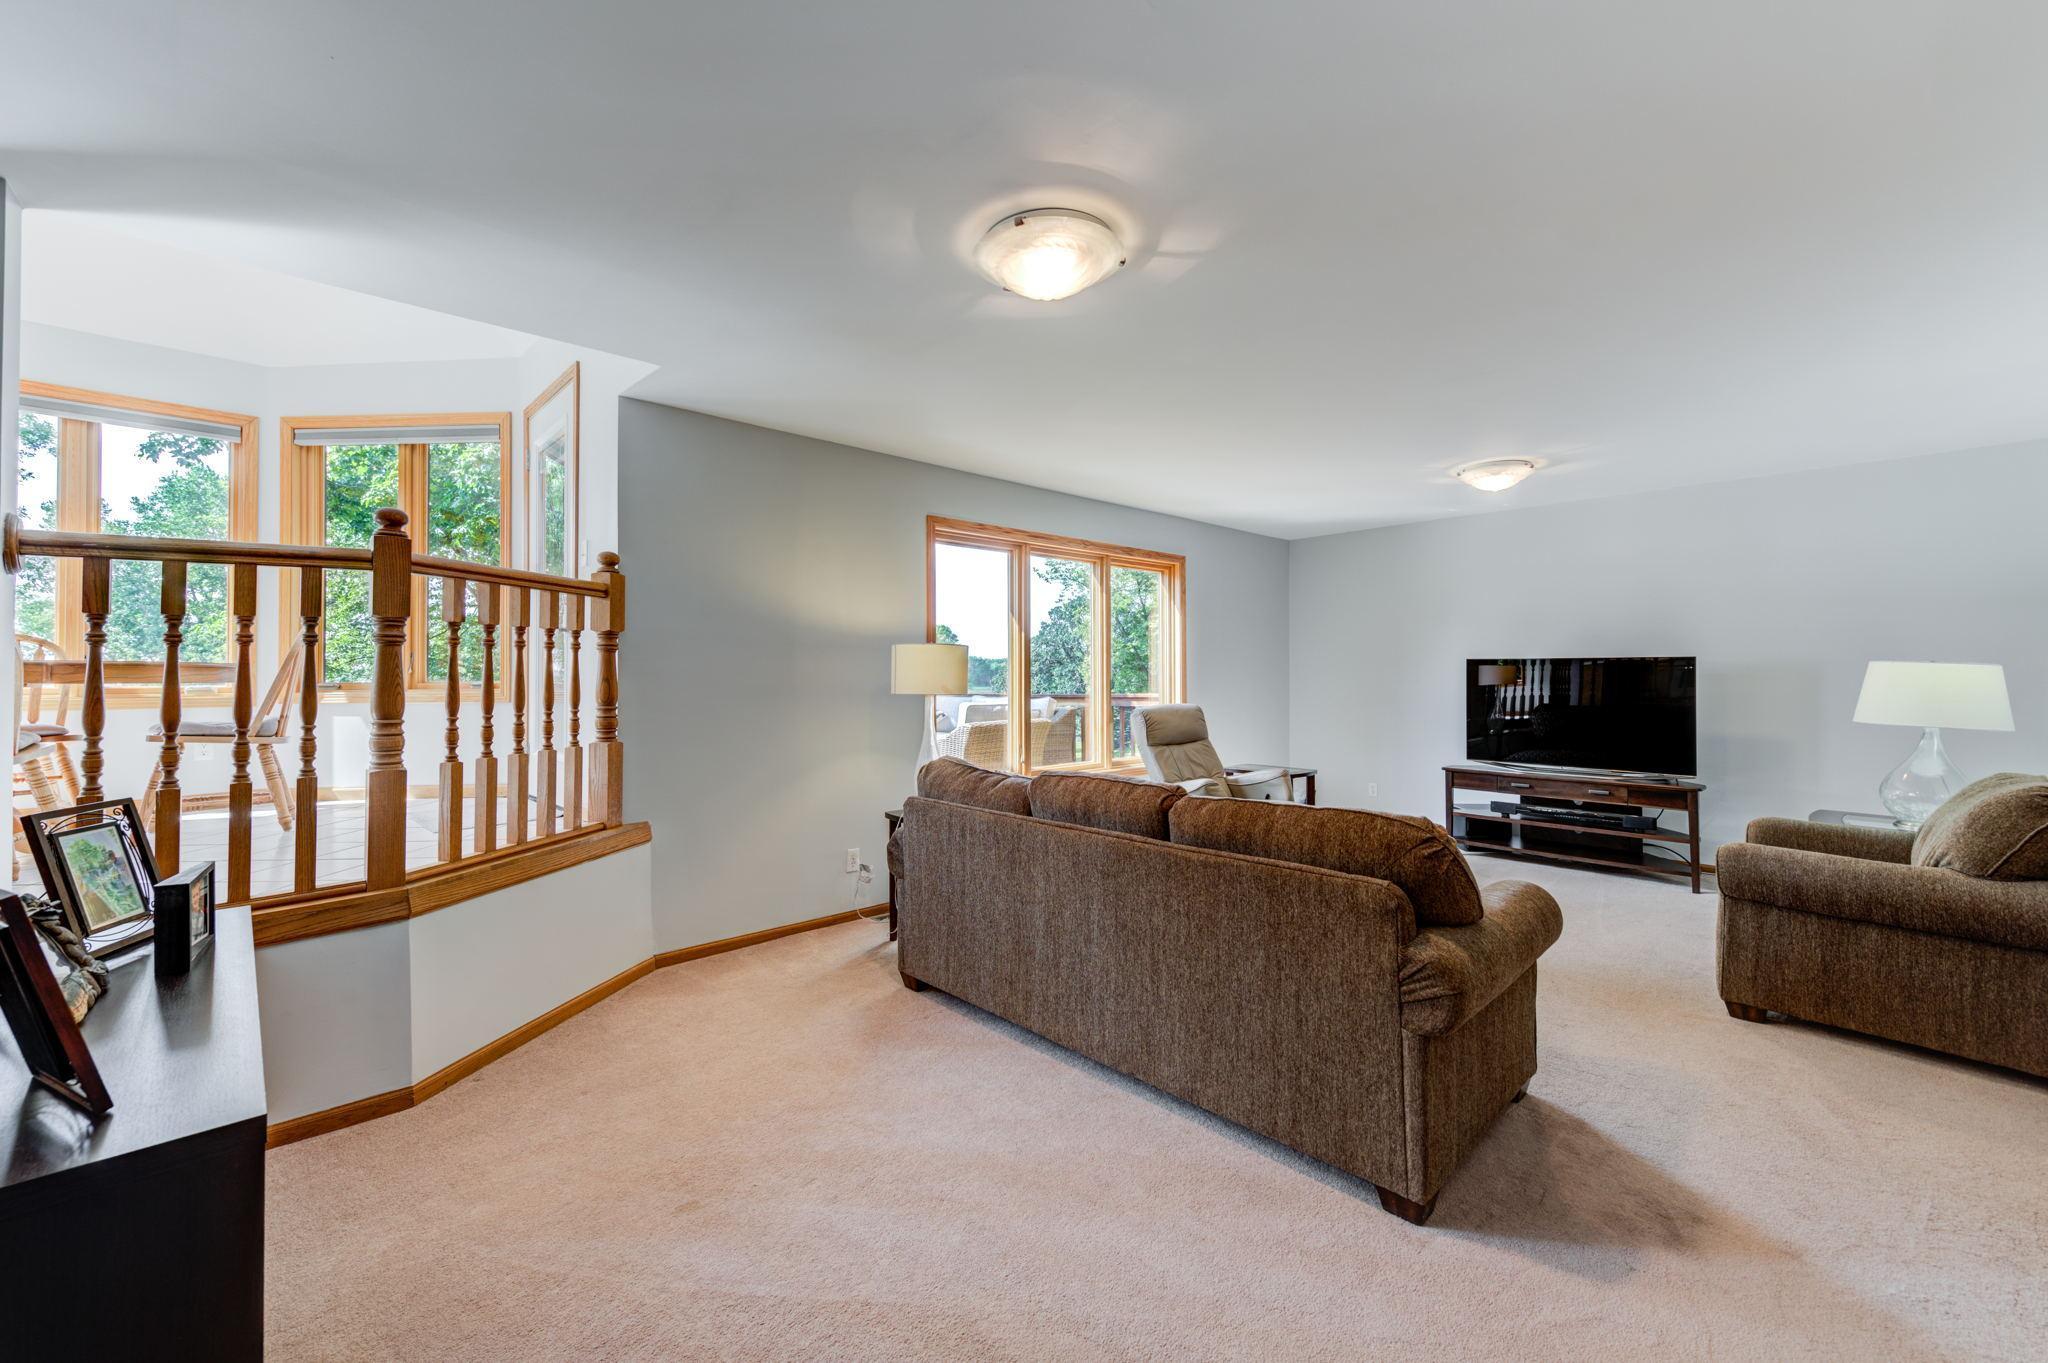 The main floor living room is open to the kitchen and features a large picture window looking out to the lake!